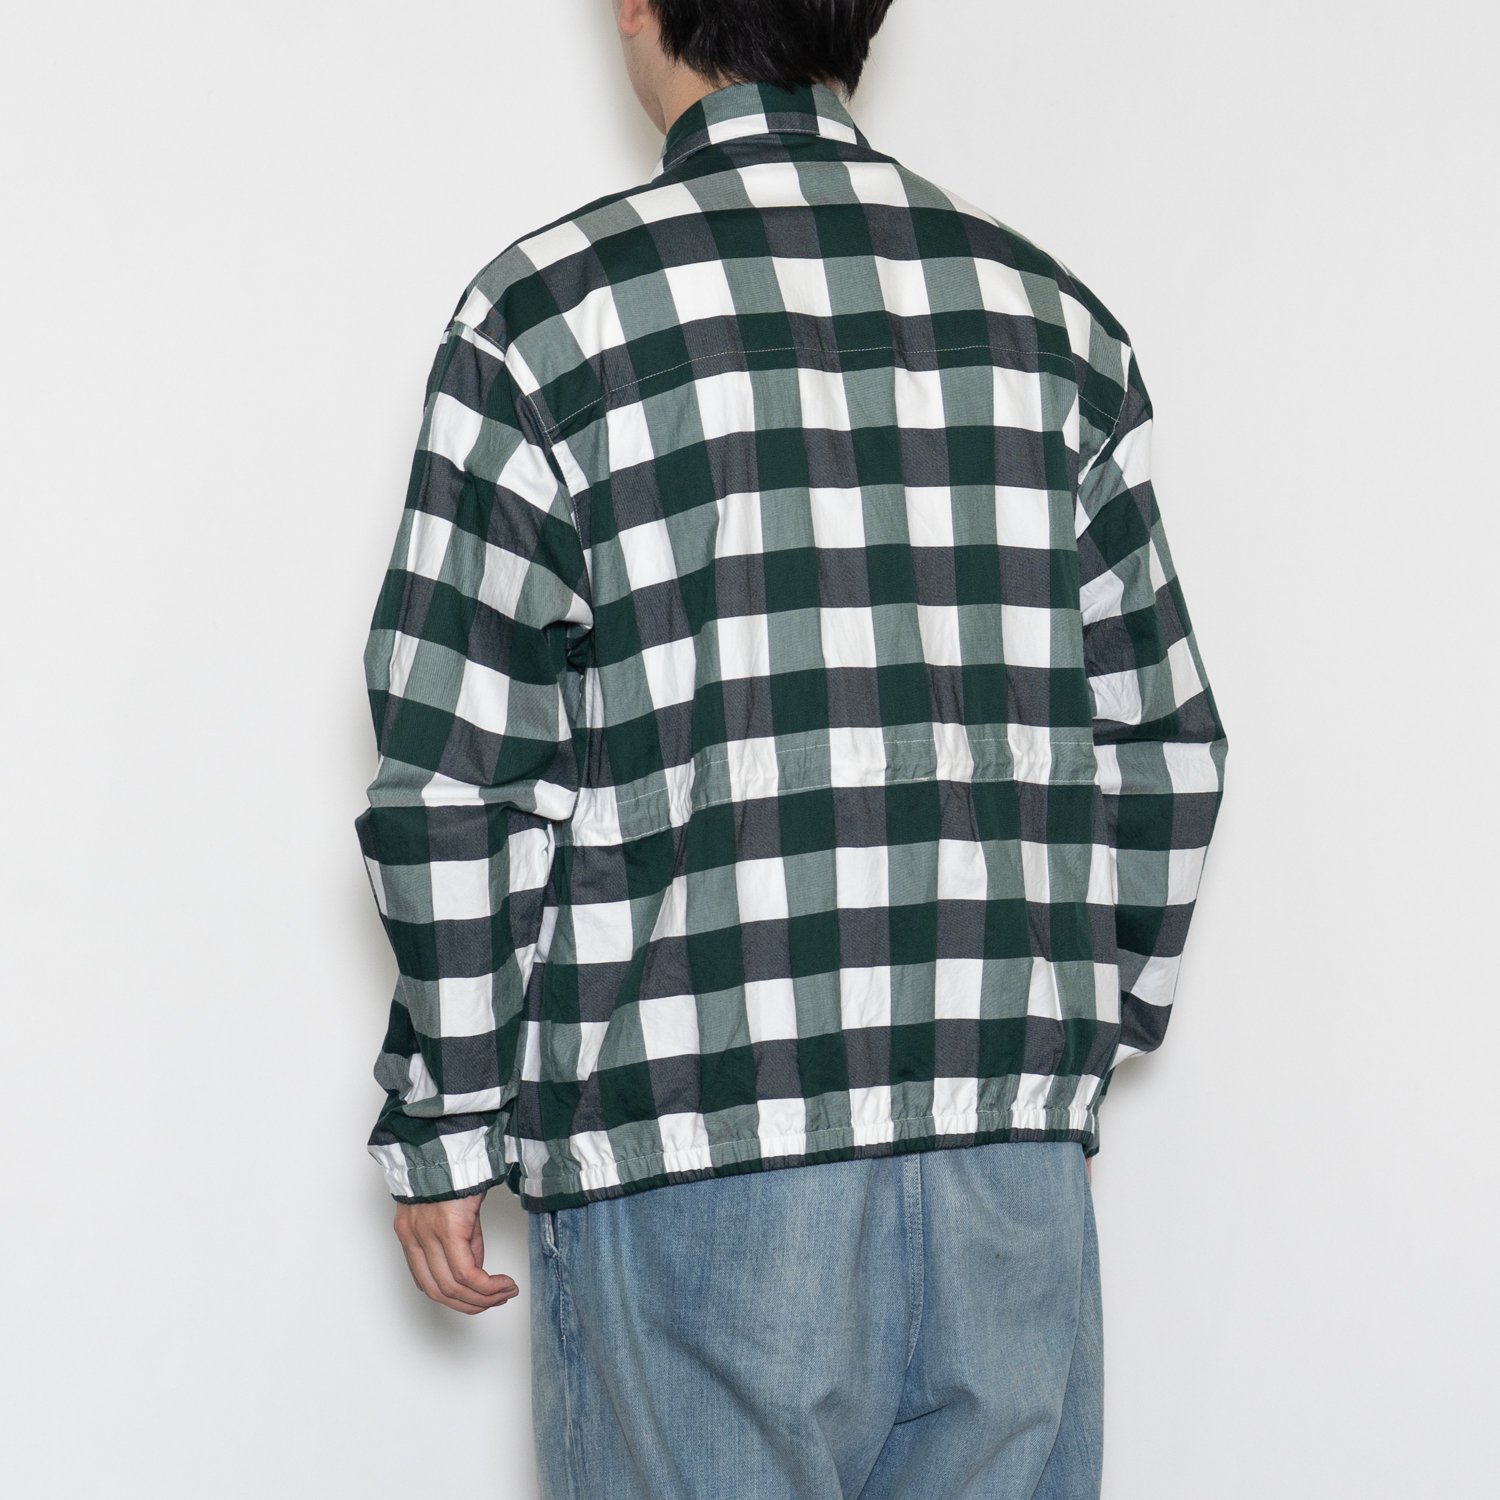 UNUSED * US2334 Gingham Checked Jacket * Green/White